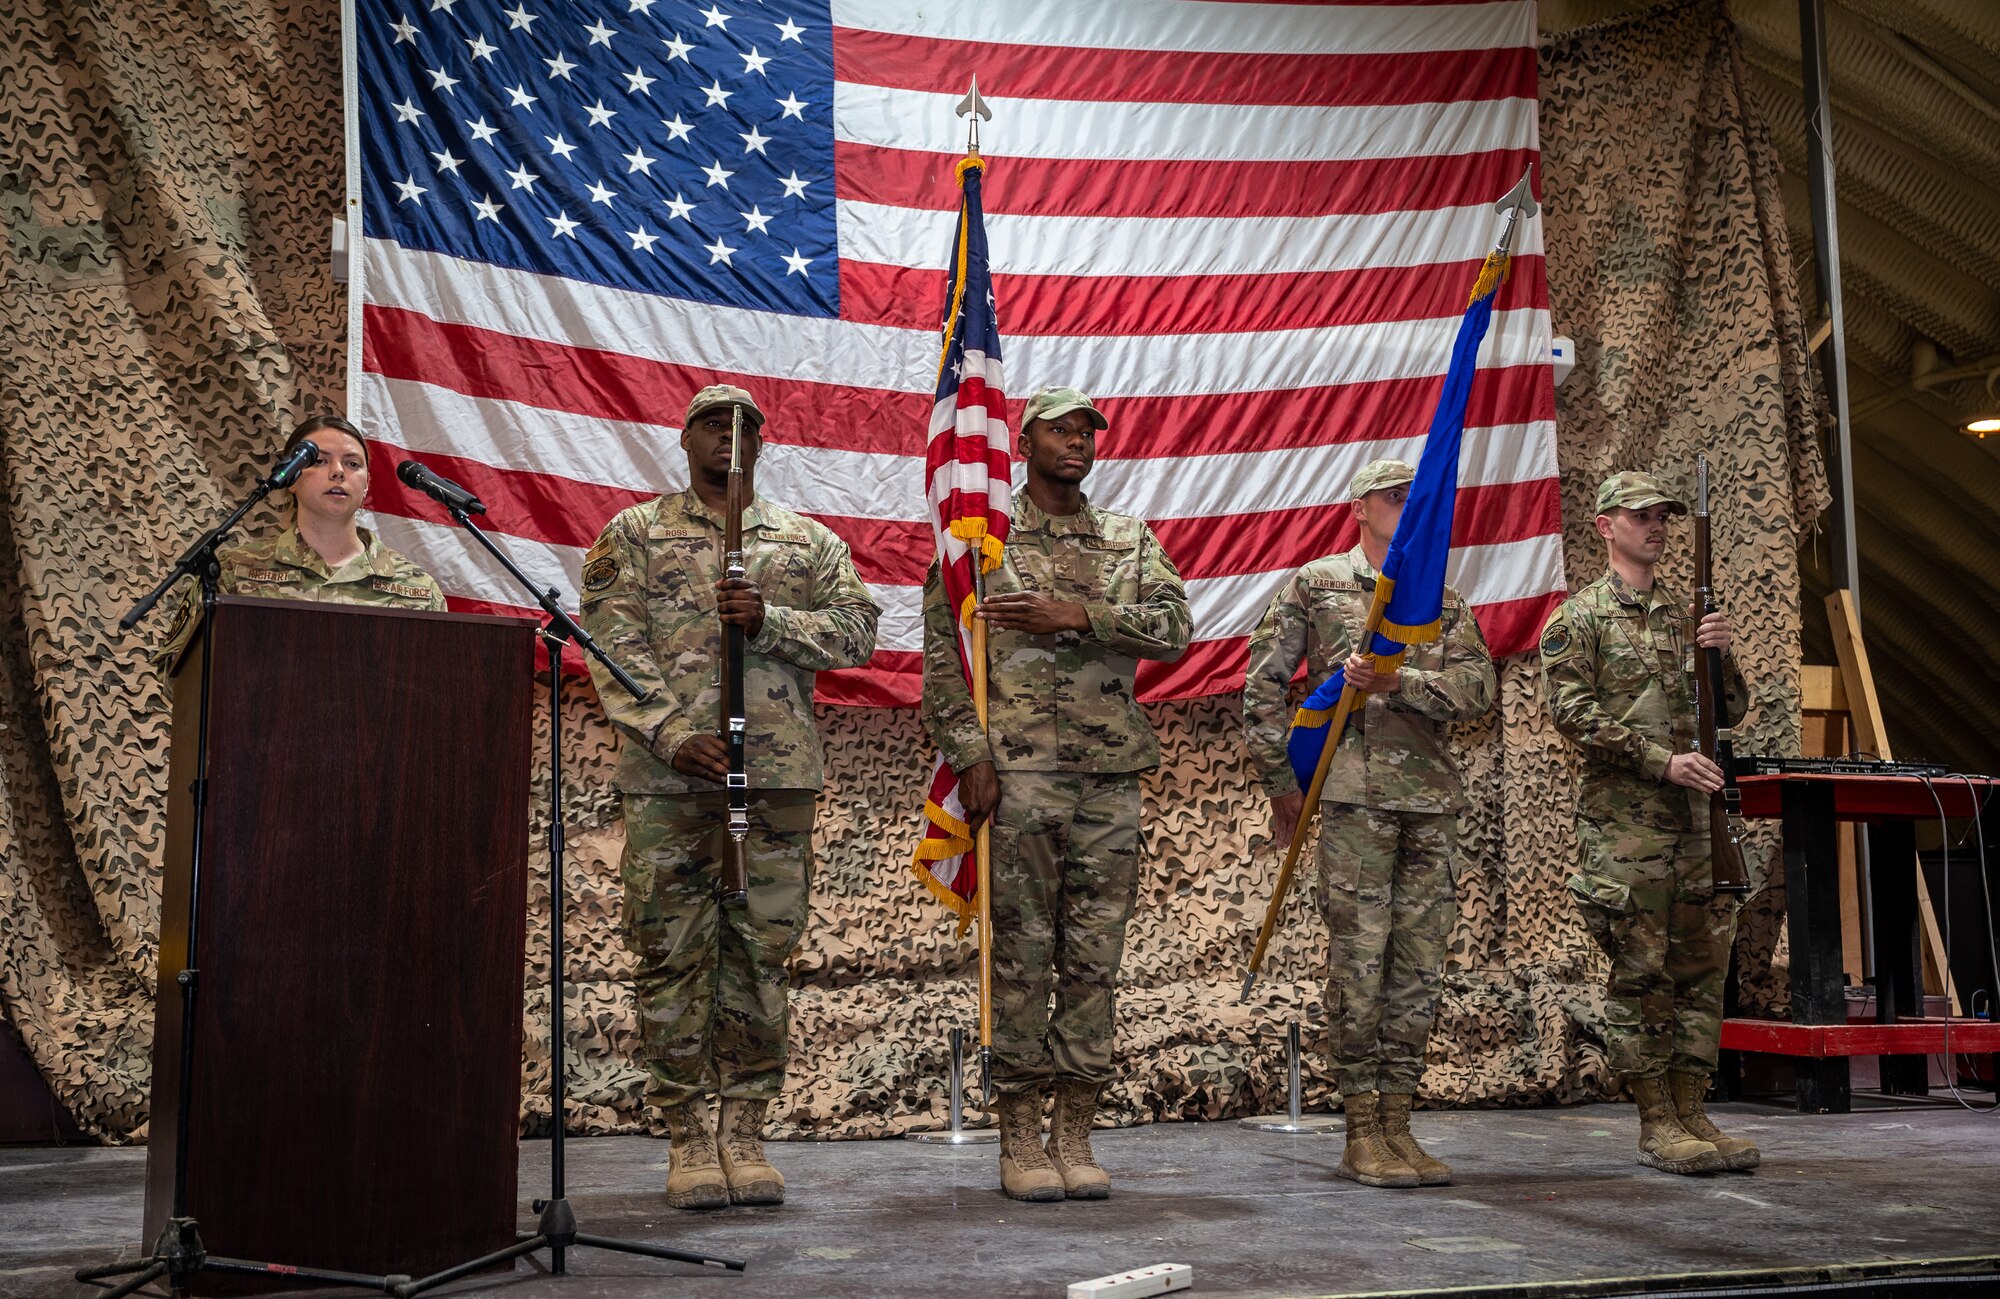 The 332d Air Expeditionary Wing Base Honor Guard presents the colors during the senior master sergeant release ceremony at an undisclosed location in Southwest Asia, March 19, 2022. The Honor Guard provides military ceremonial support and dignified transfer support when called upon. (U.S. Air Force photo by Master Sgt. Christopher Parr)